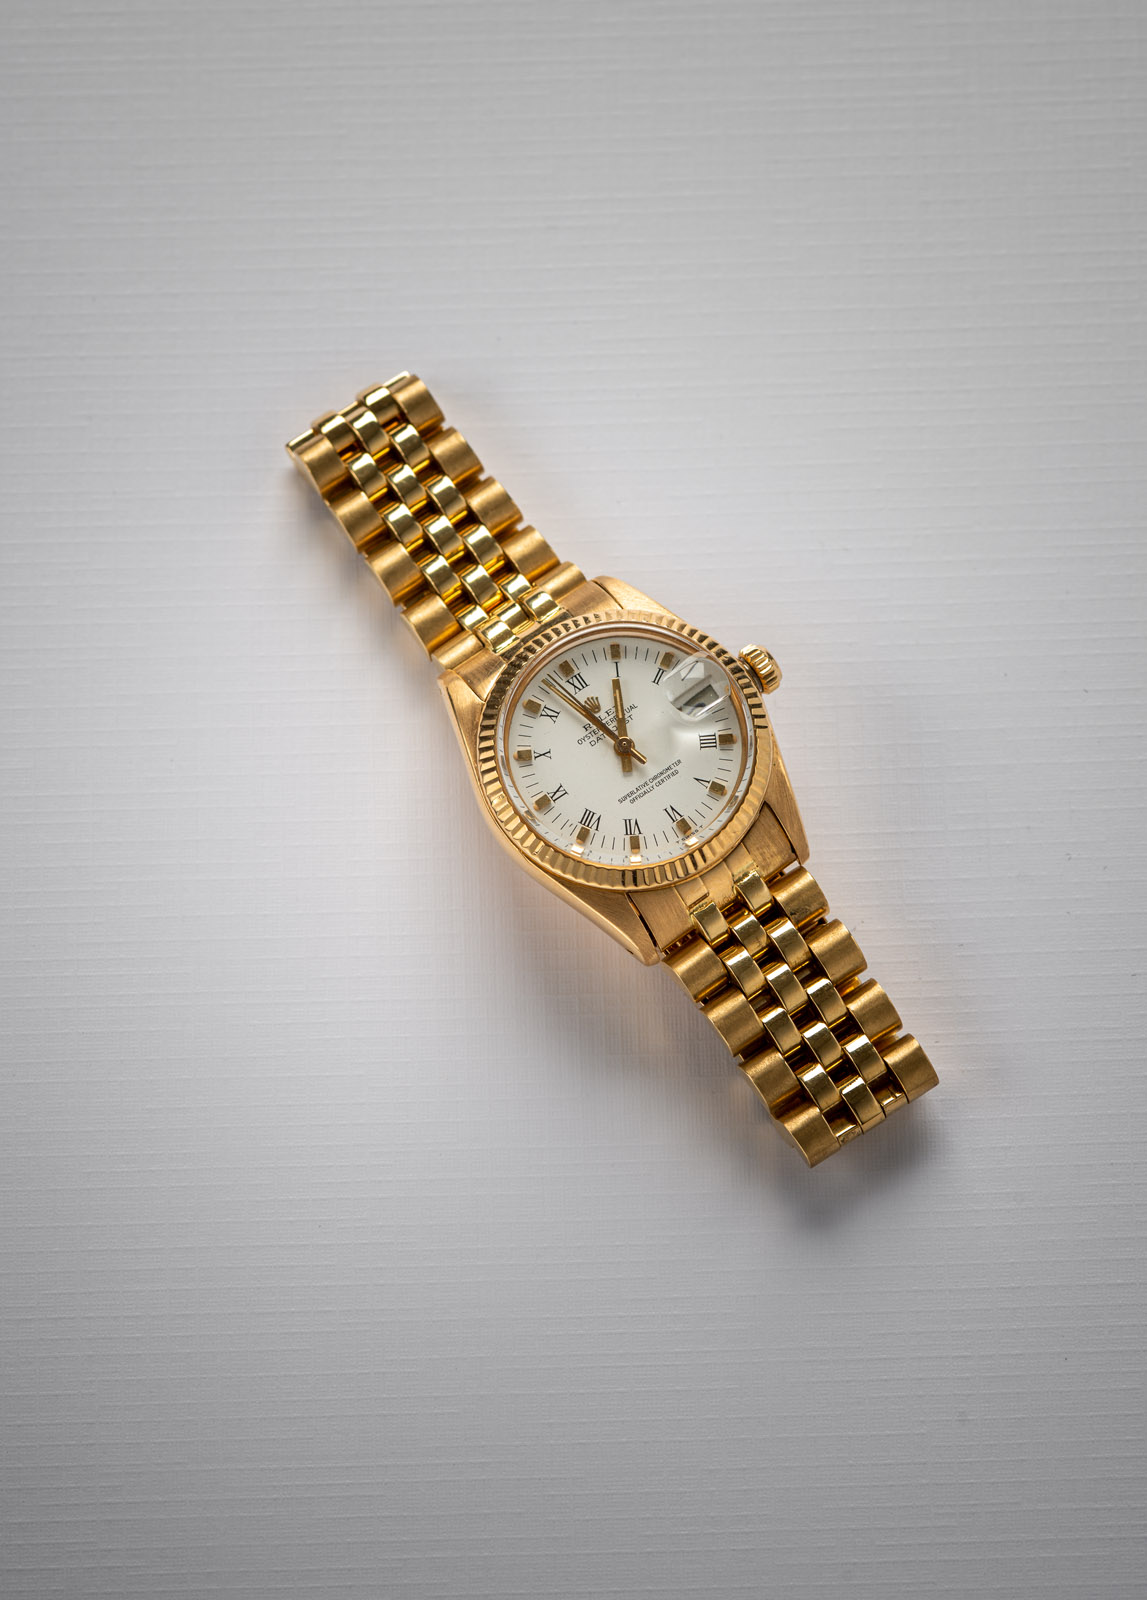 A RARE ROLEX OYSTER MEDIUM LADY'S WATCH - Image 2 of 3